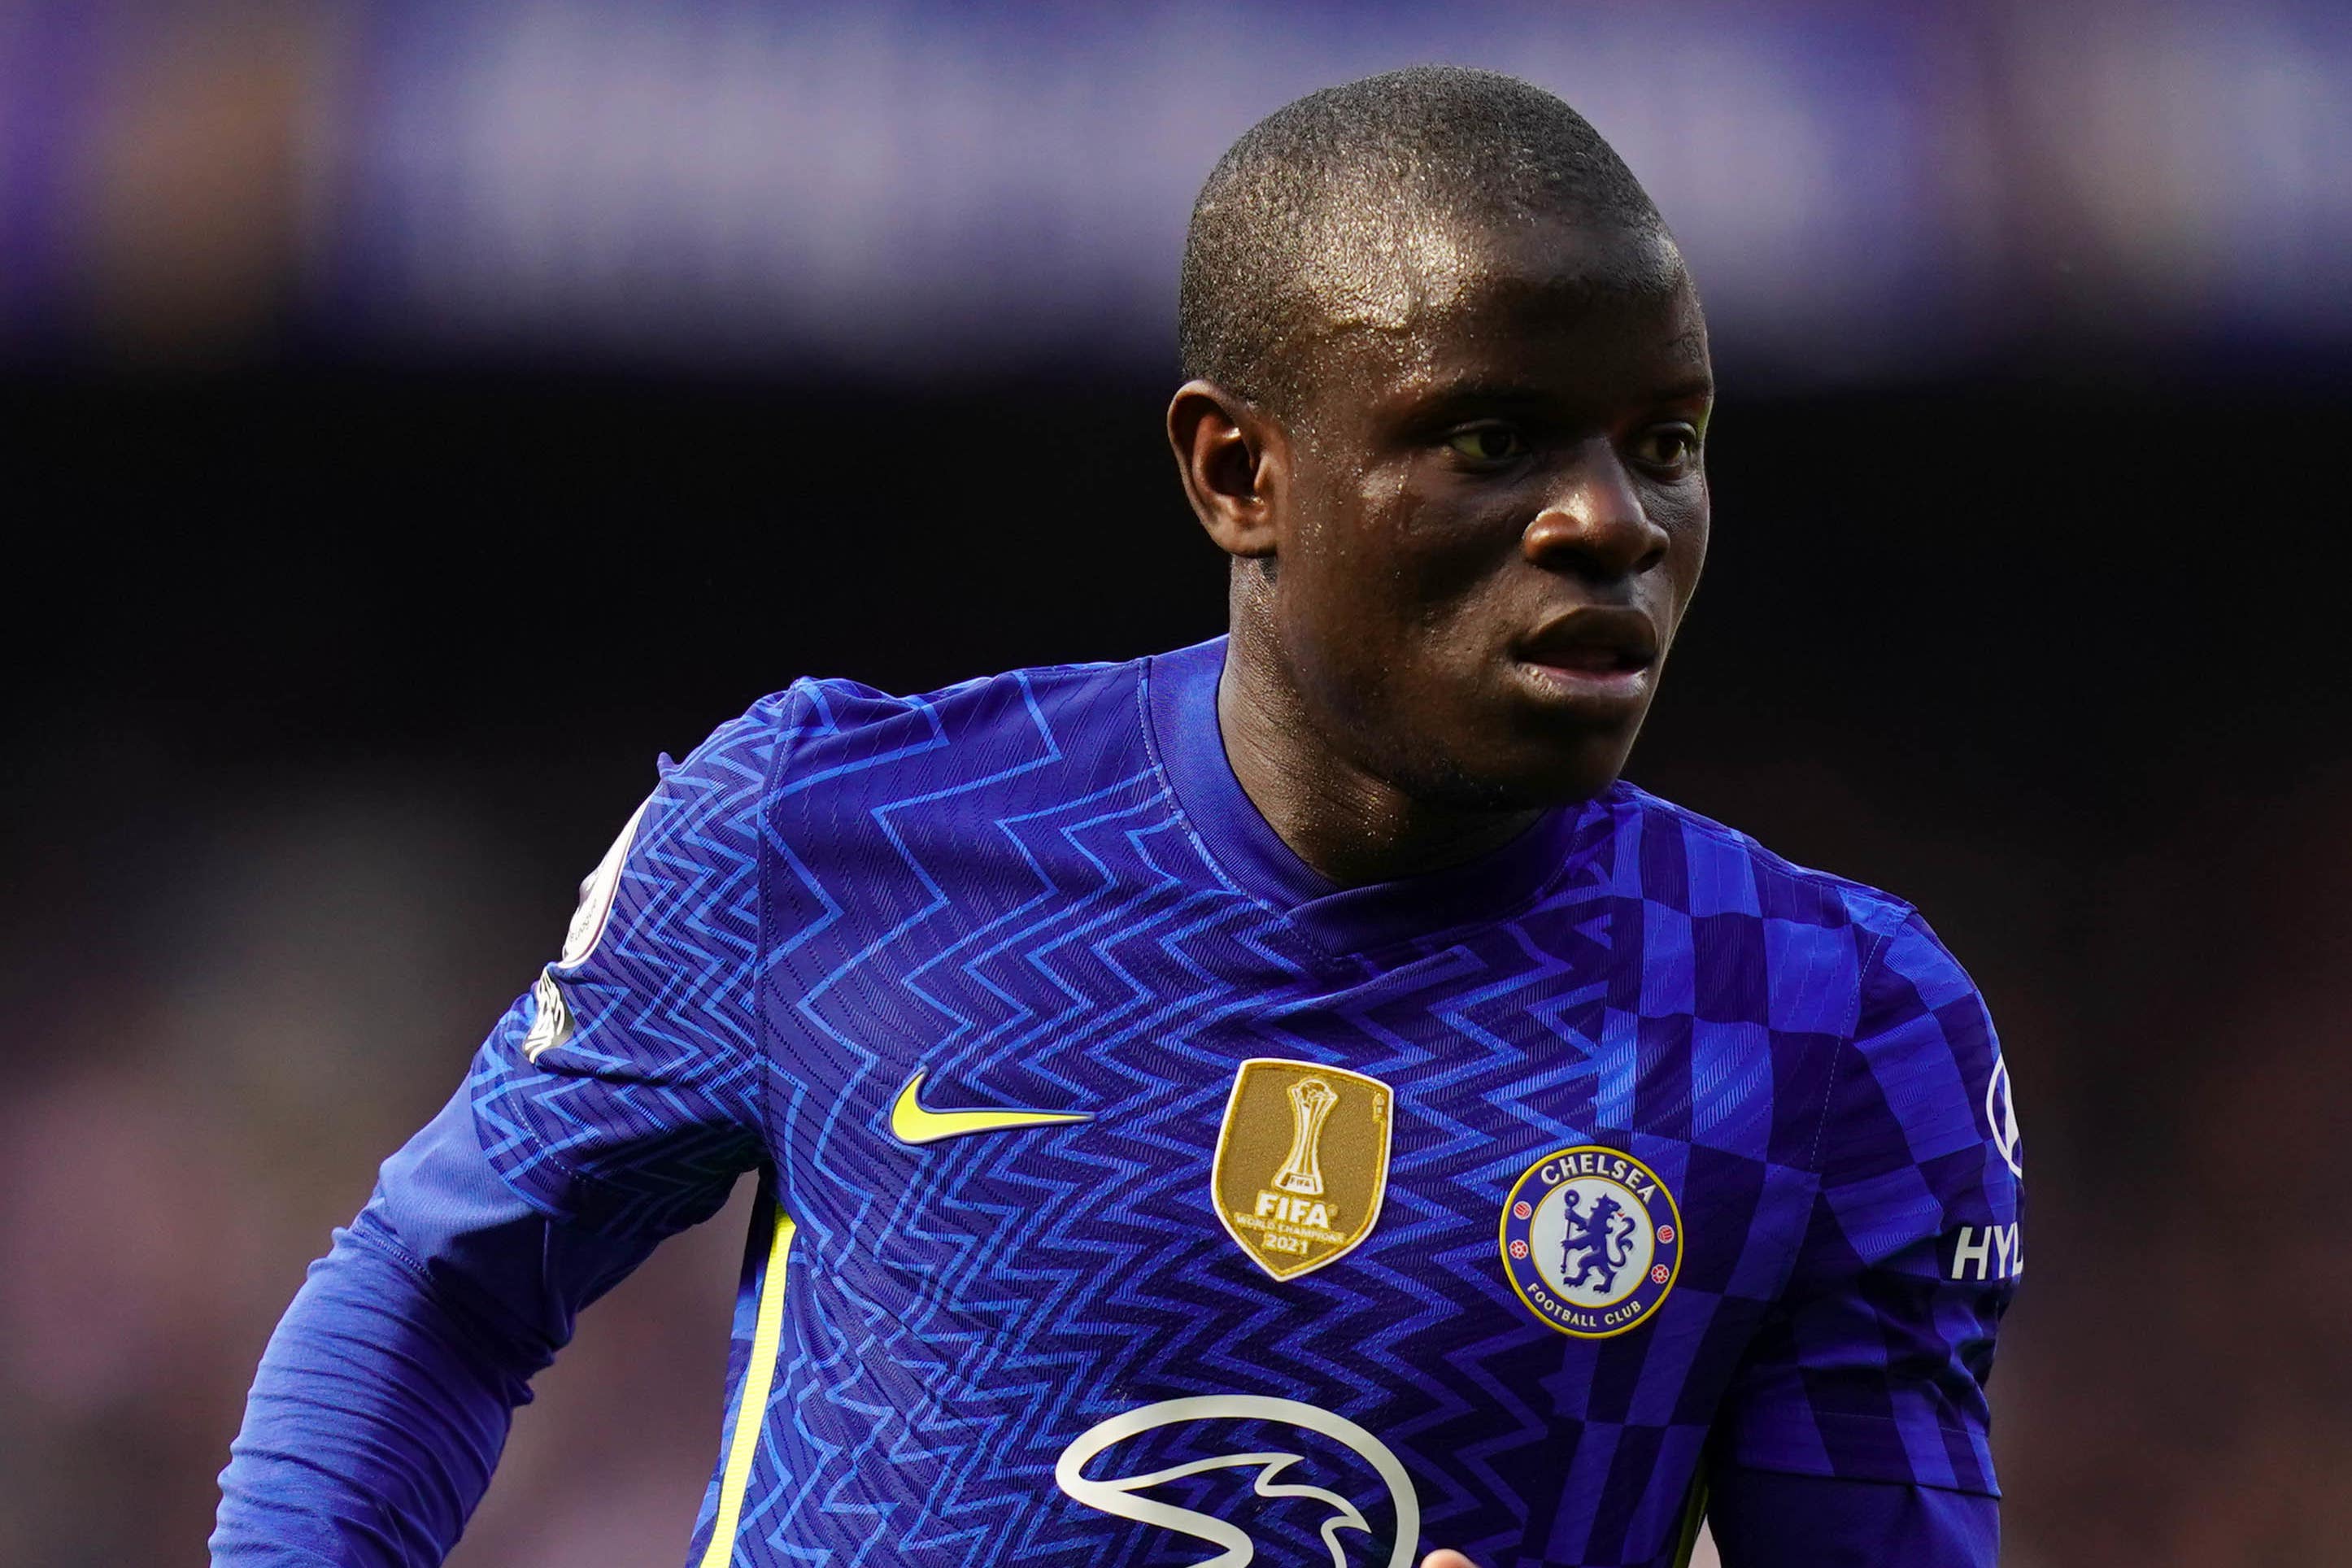 Graham Potter insists the latest injury for N’Golo Kante, pictured, will not affect any contract talks with Chelsea (Adam Davy/PA)